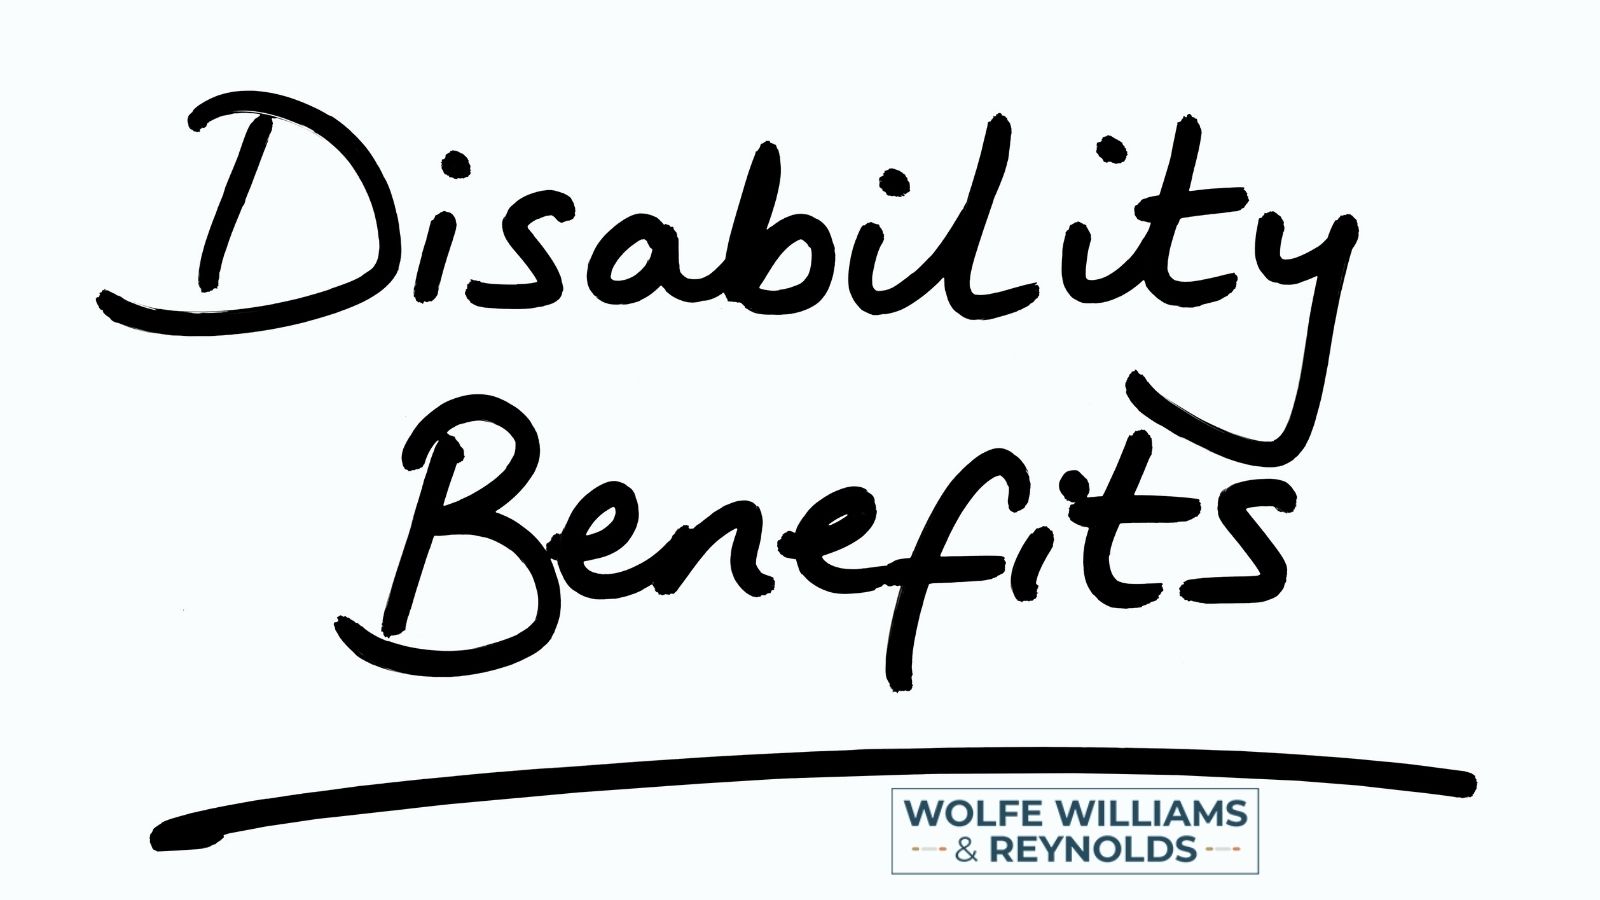 How can I improve my chances of earning disability benefits?